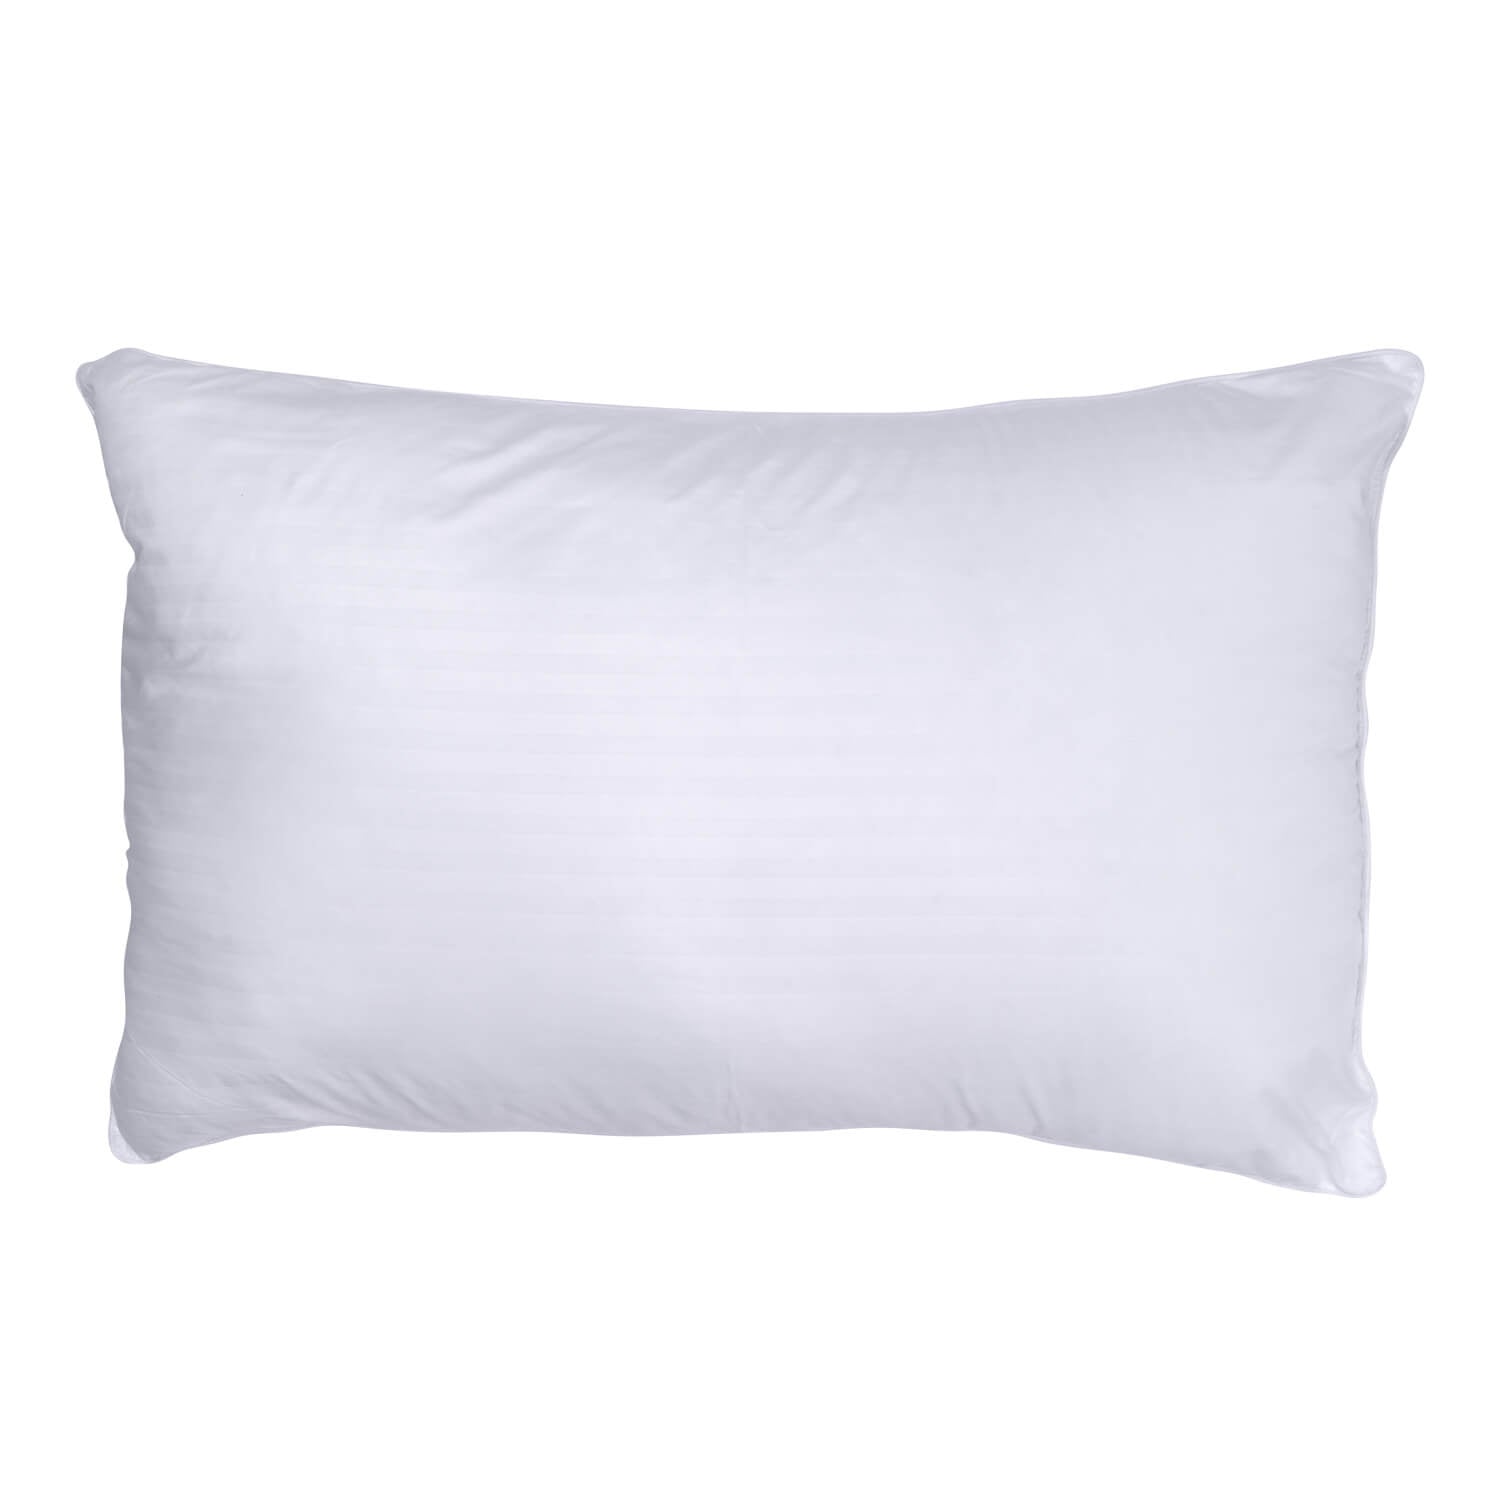 The Fine Bedding Company Luna Pillow 1 Shaws Department Stores